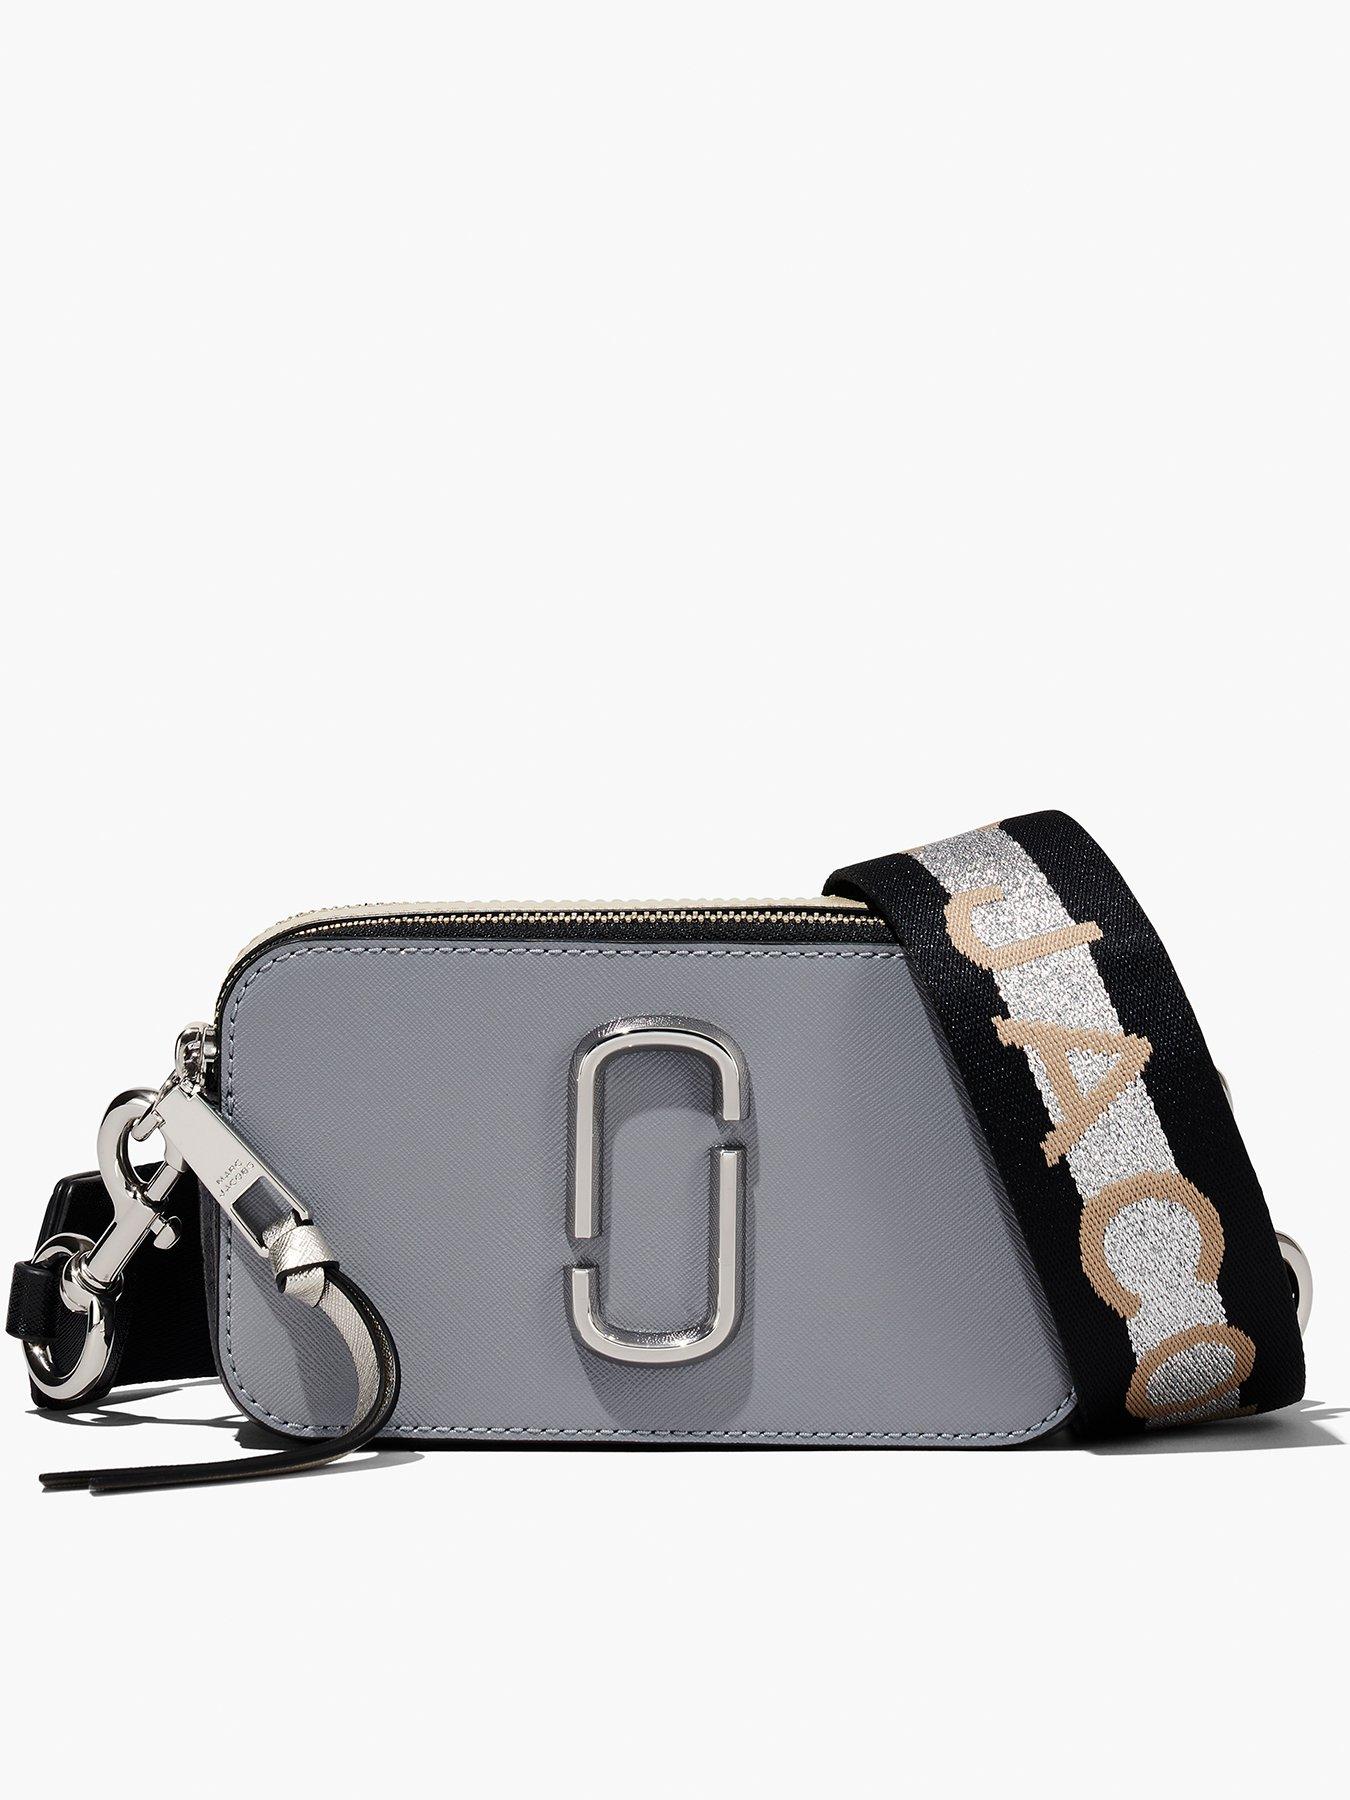 Marc Jacobs The Snapshot Camera Bag Light Grey in Leather with